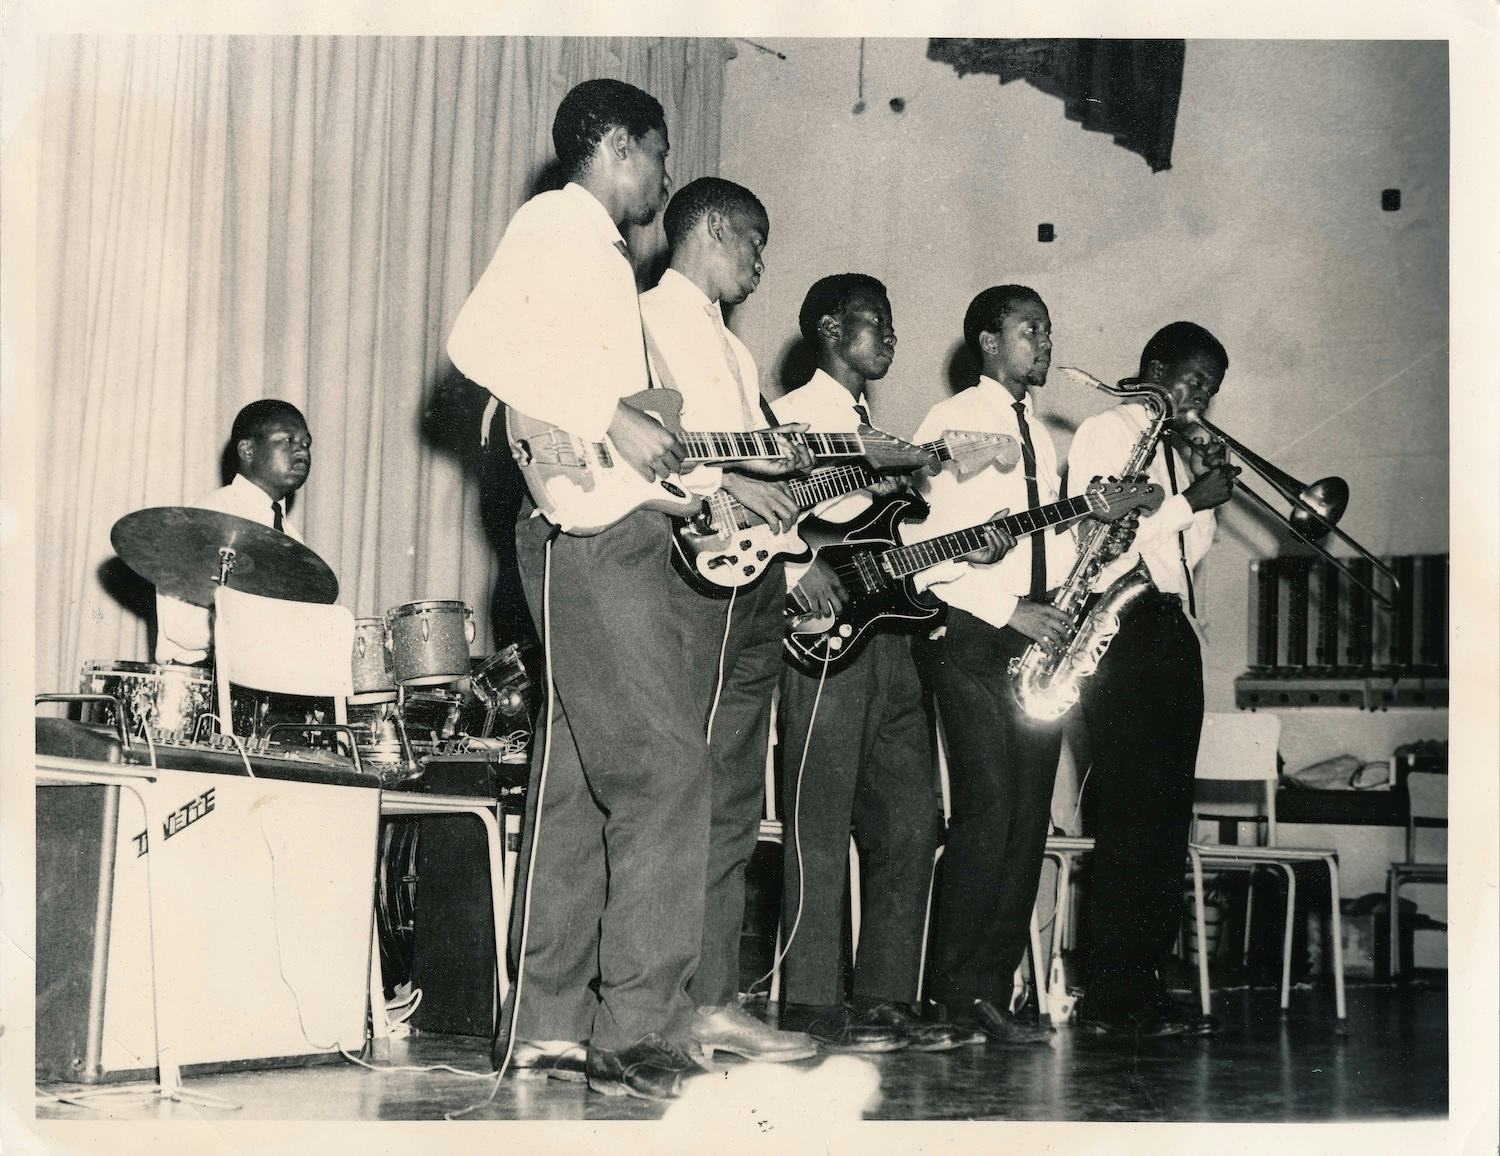 Archival image of the Metronome Swing Orchestra in Botswana © Thero Makepe